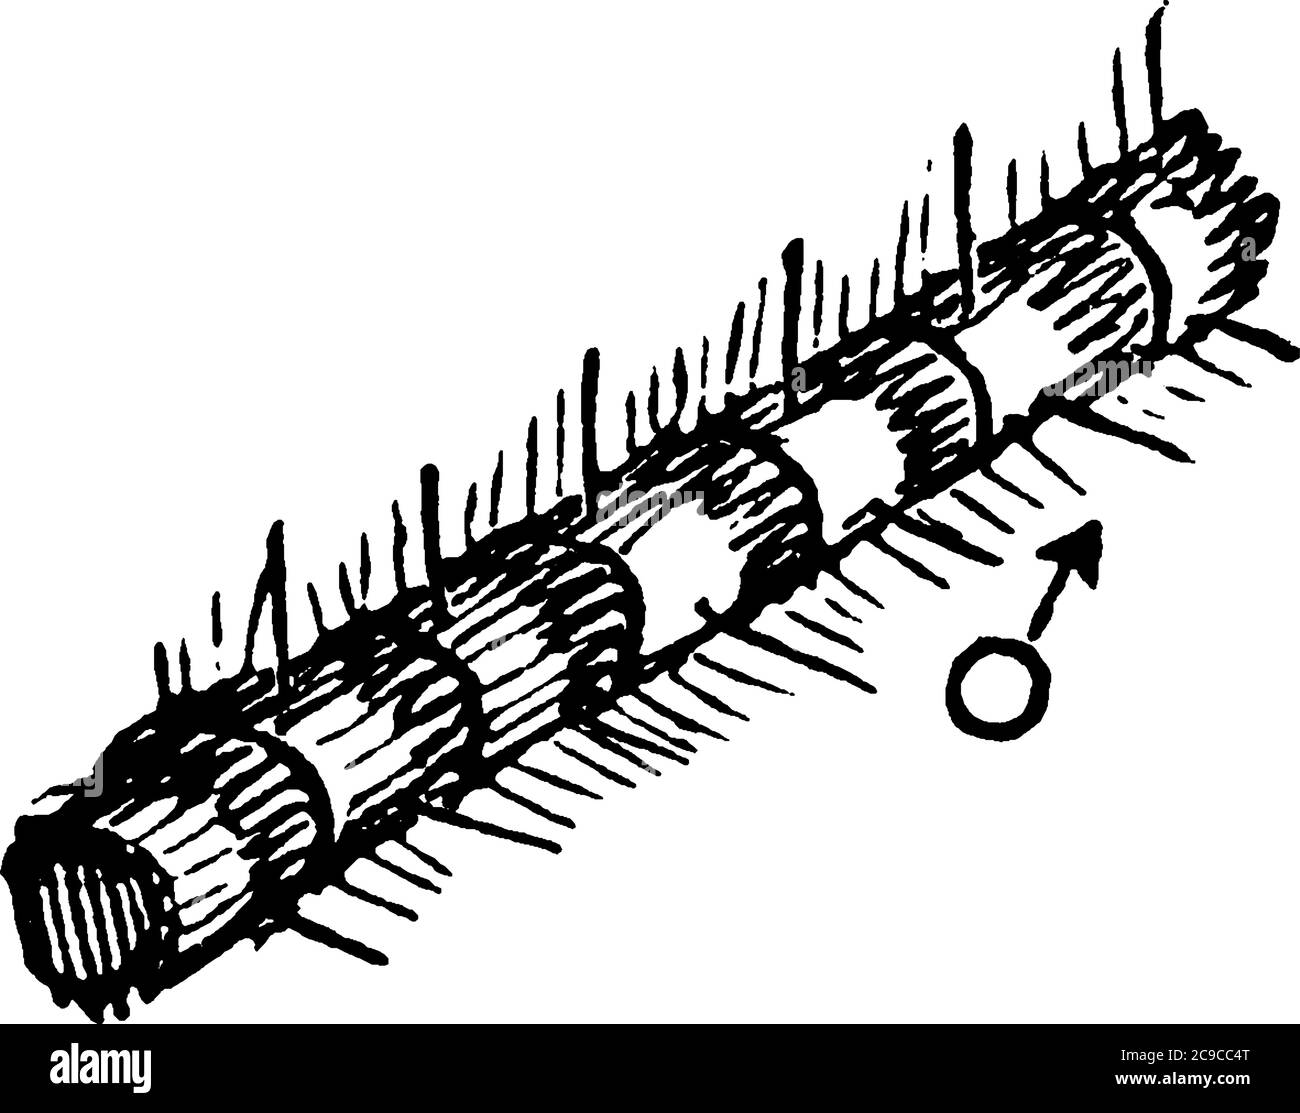 A male armyworm, Leucania unipuncta species, structural detail. The body has longitudinal stripes, segmented and somewhat cylindrical in shape, vintag Stock Vector